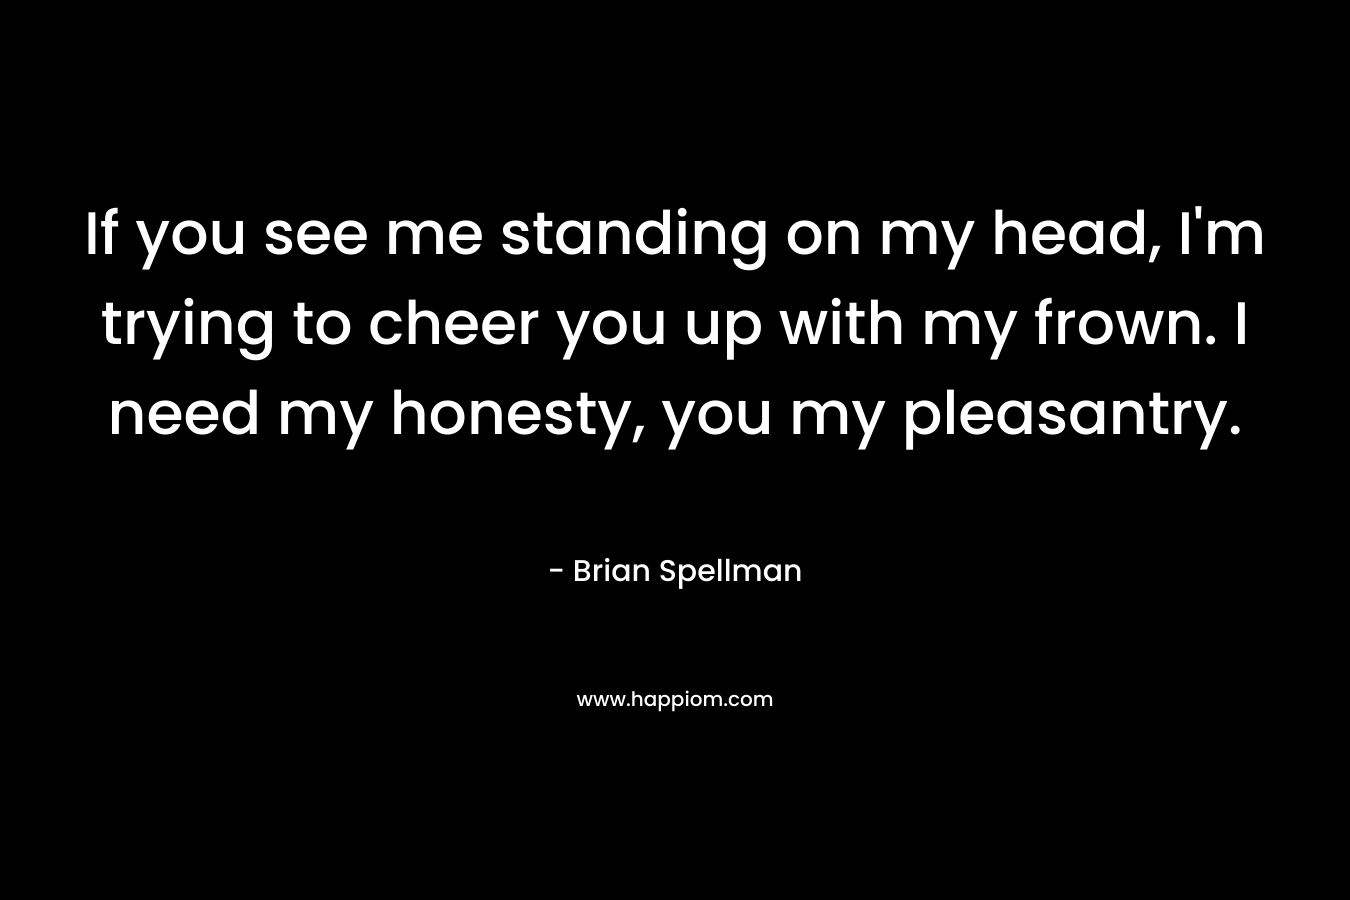 If you see me standing on my head, I’m trying to cheer you up with my frown. I need my honesty, you my pleasantry. – Brian Spellman